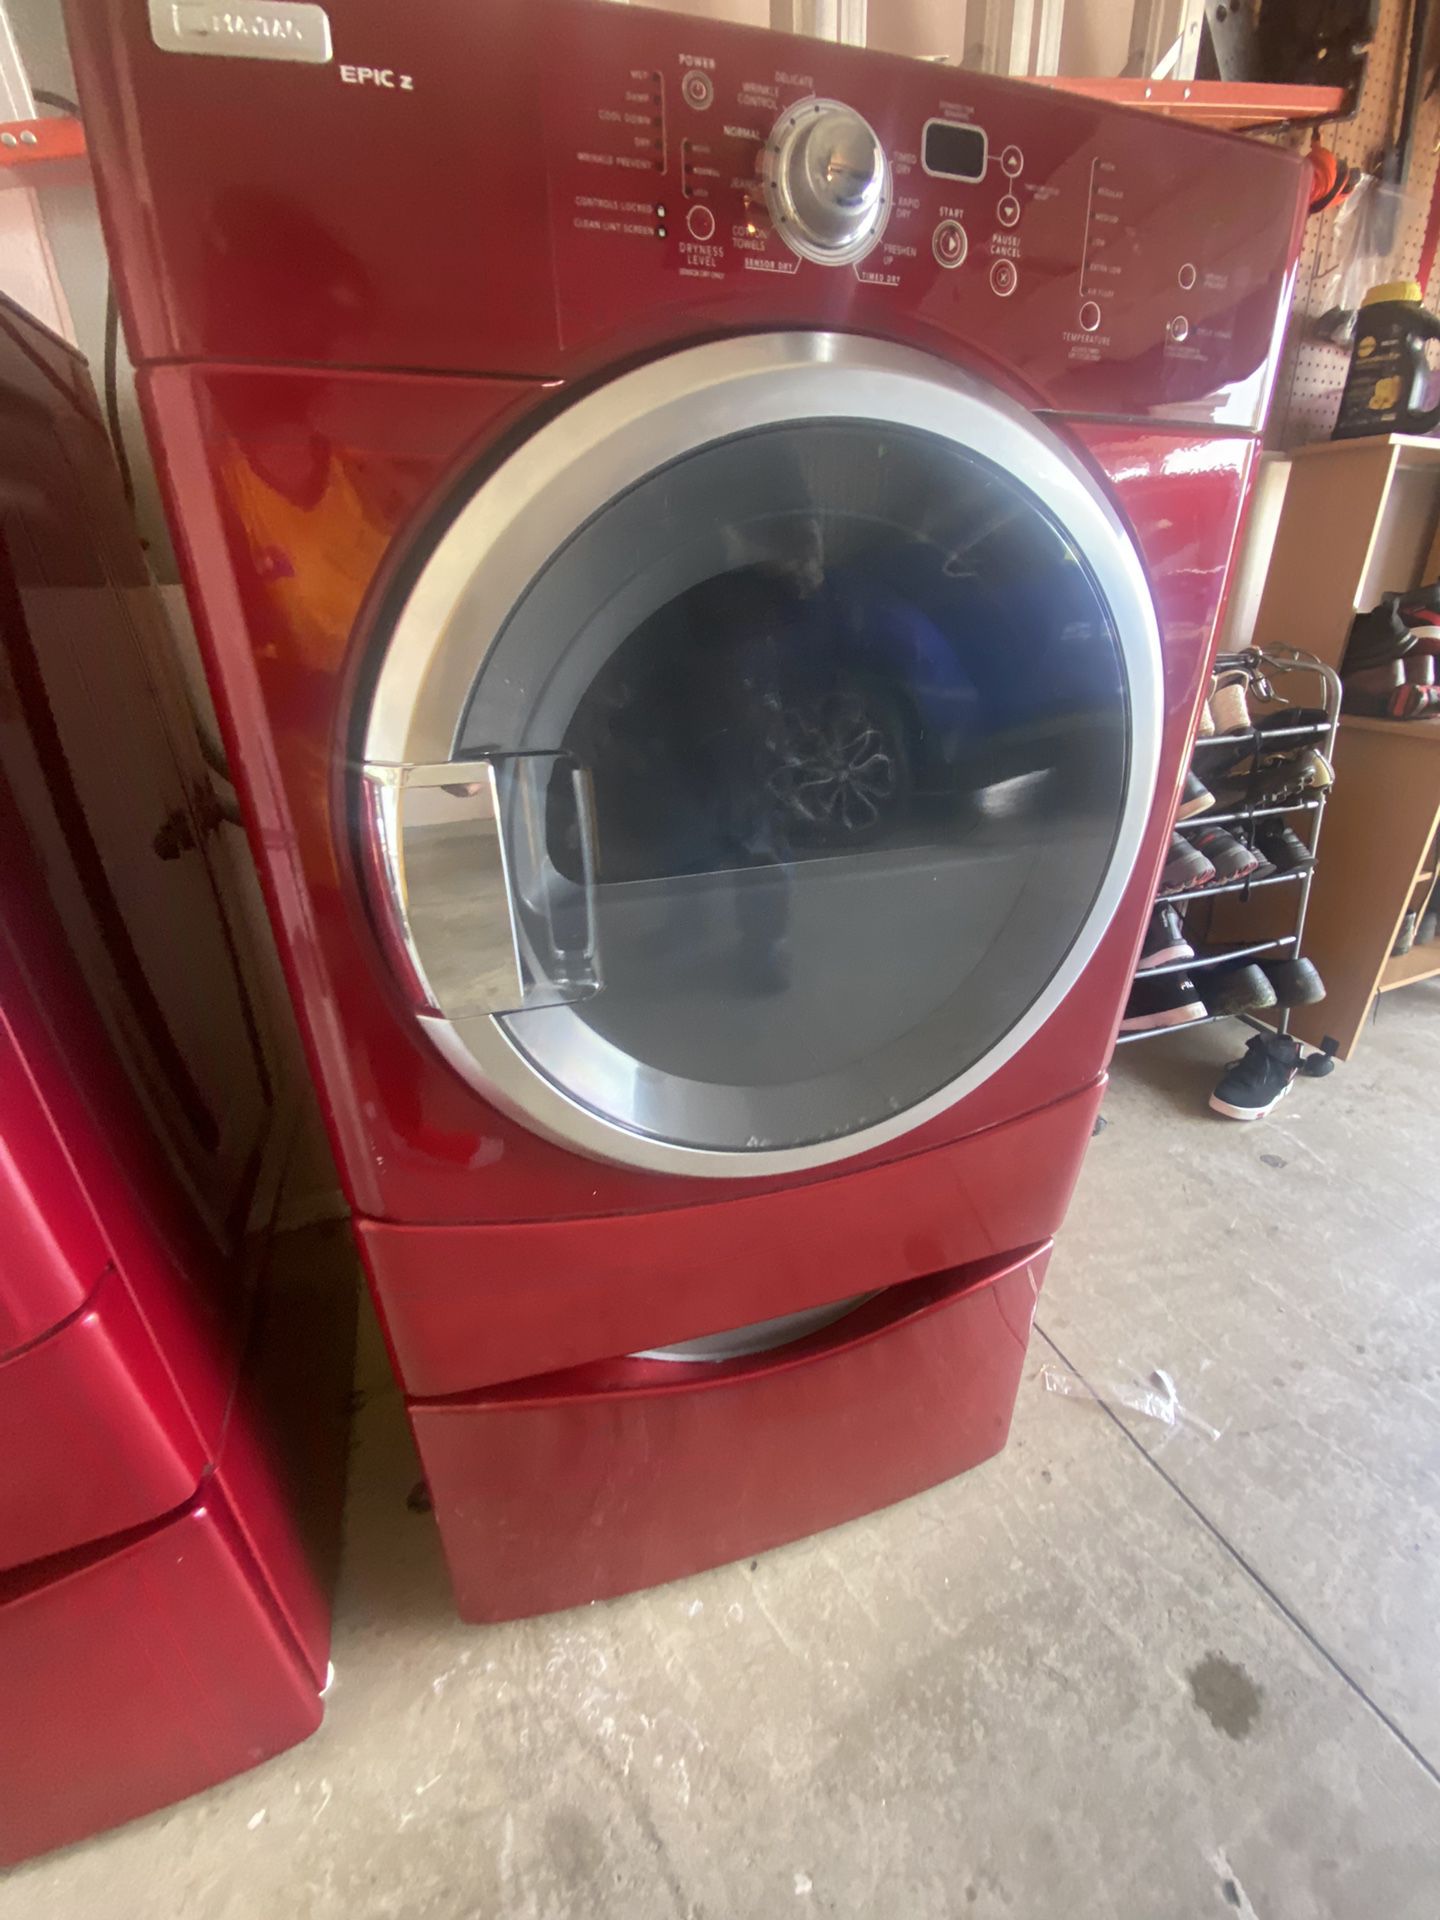 RED MAYTAG "Epic z" High-Efficiency Front Load Washer& Dryer 